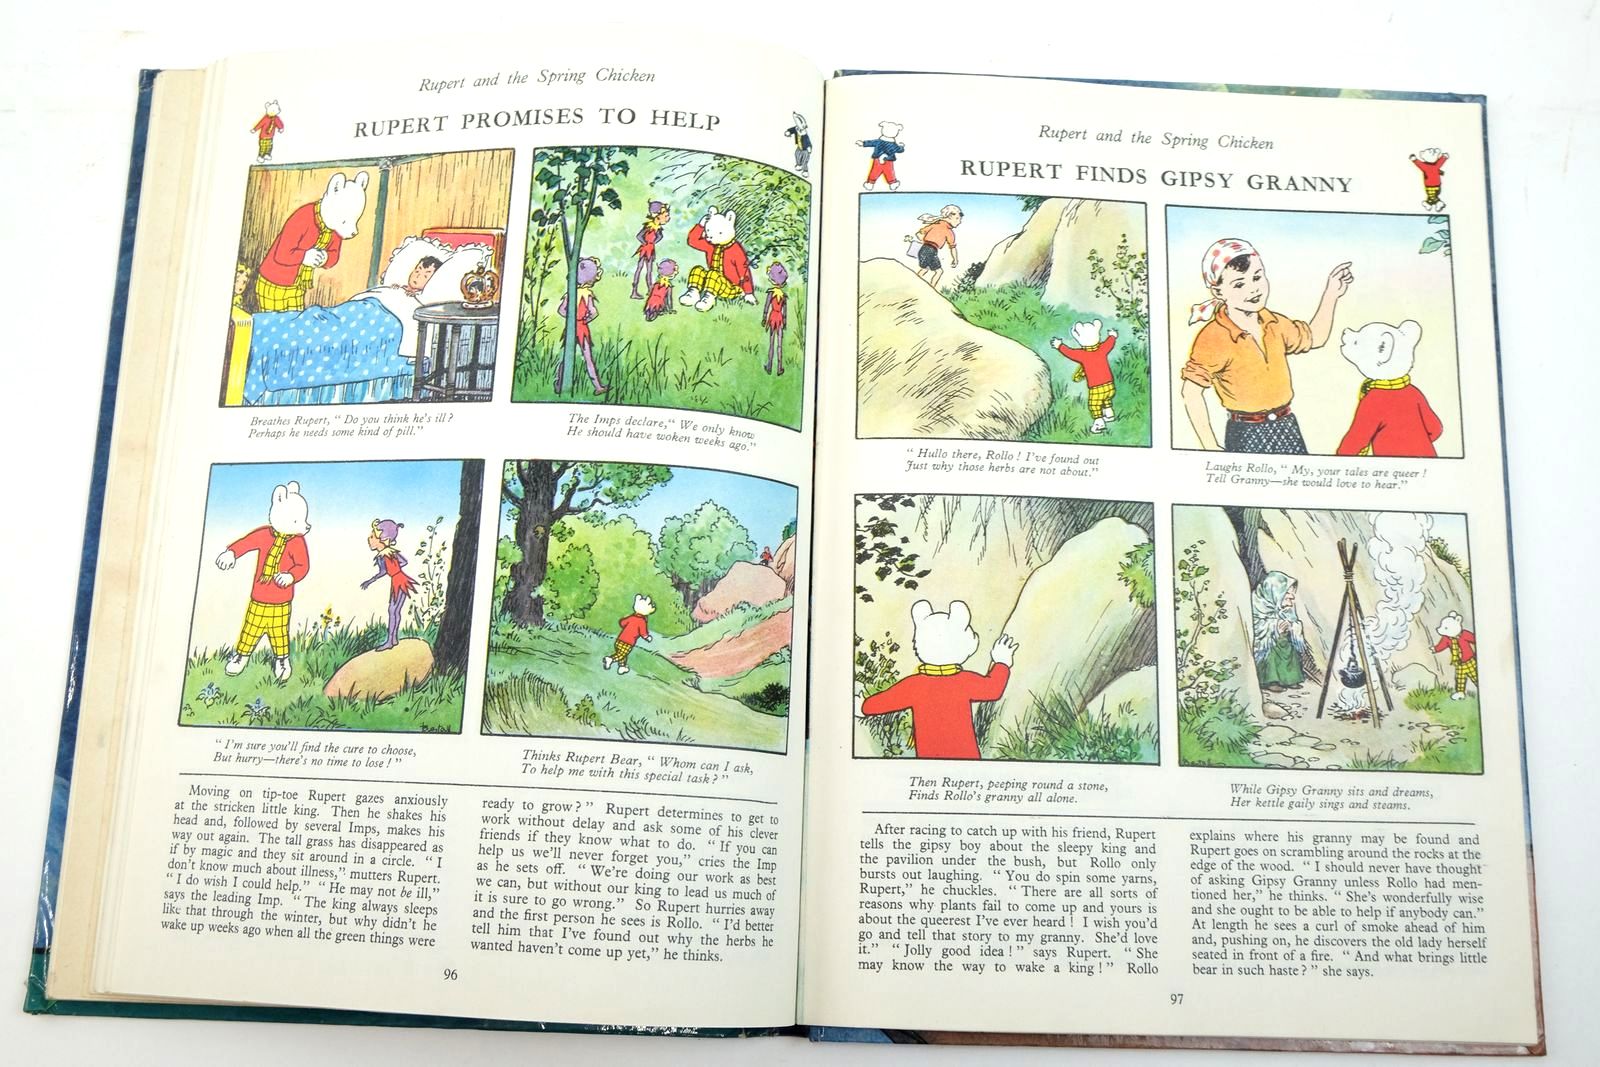 Photo of RUPERT ANNUAL 1966 written by Bestall, Alfred illustrated by Bestall, Alfred published by Daily Express (STOCK CODE: 2136996)  for sale by Stella & Rose's Books